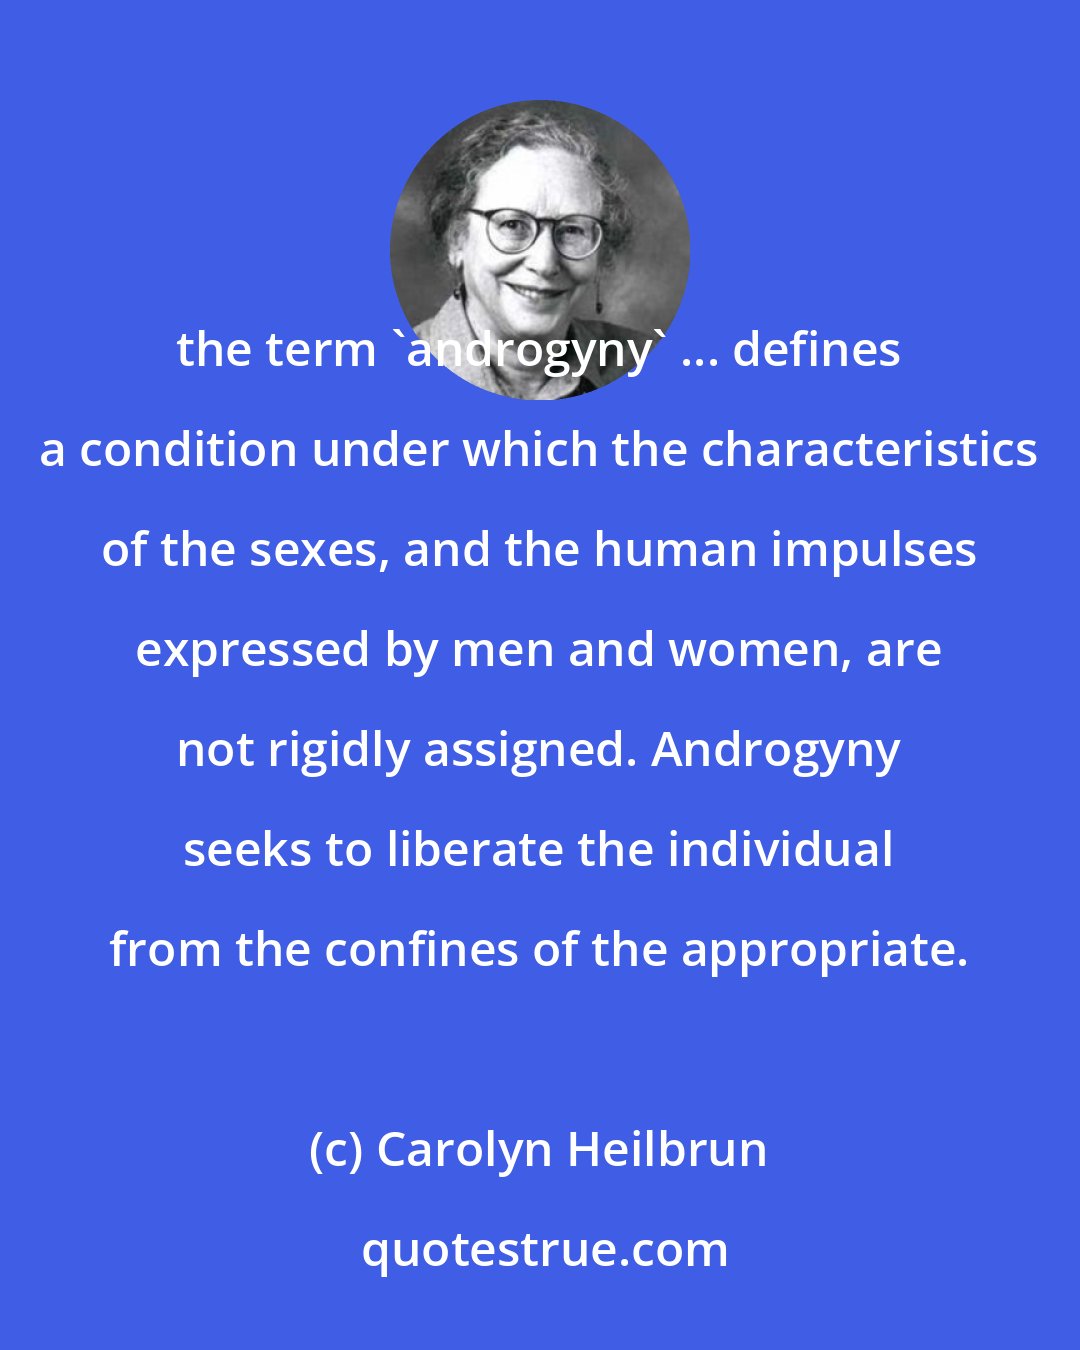 Carolyn Heilbrun: the term 'androgyny' ... defines a condition under which the characteristics of the sexes, and the human impulses expressed by men and women, are not rigidly assigned. Androgyny seeks to liberate the individual from the confines of the appropriate.